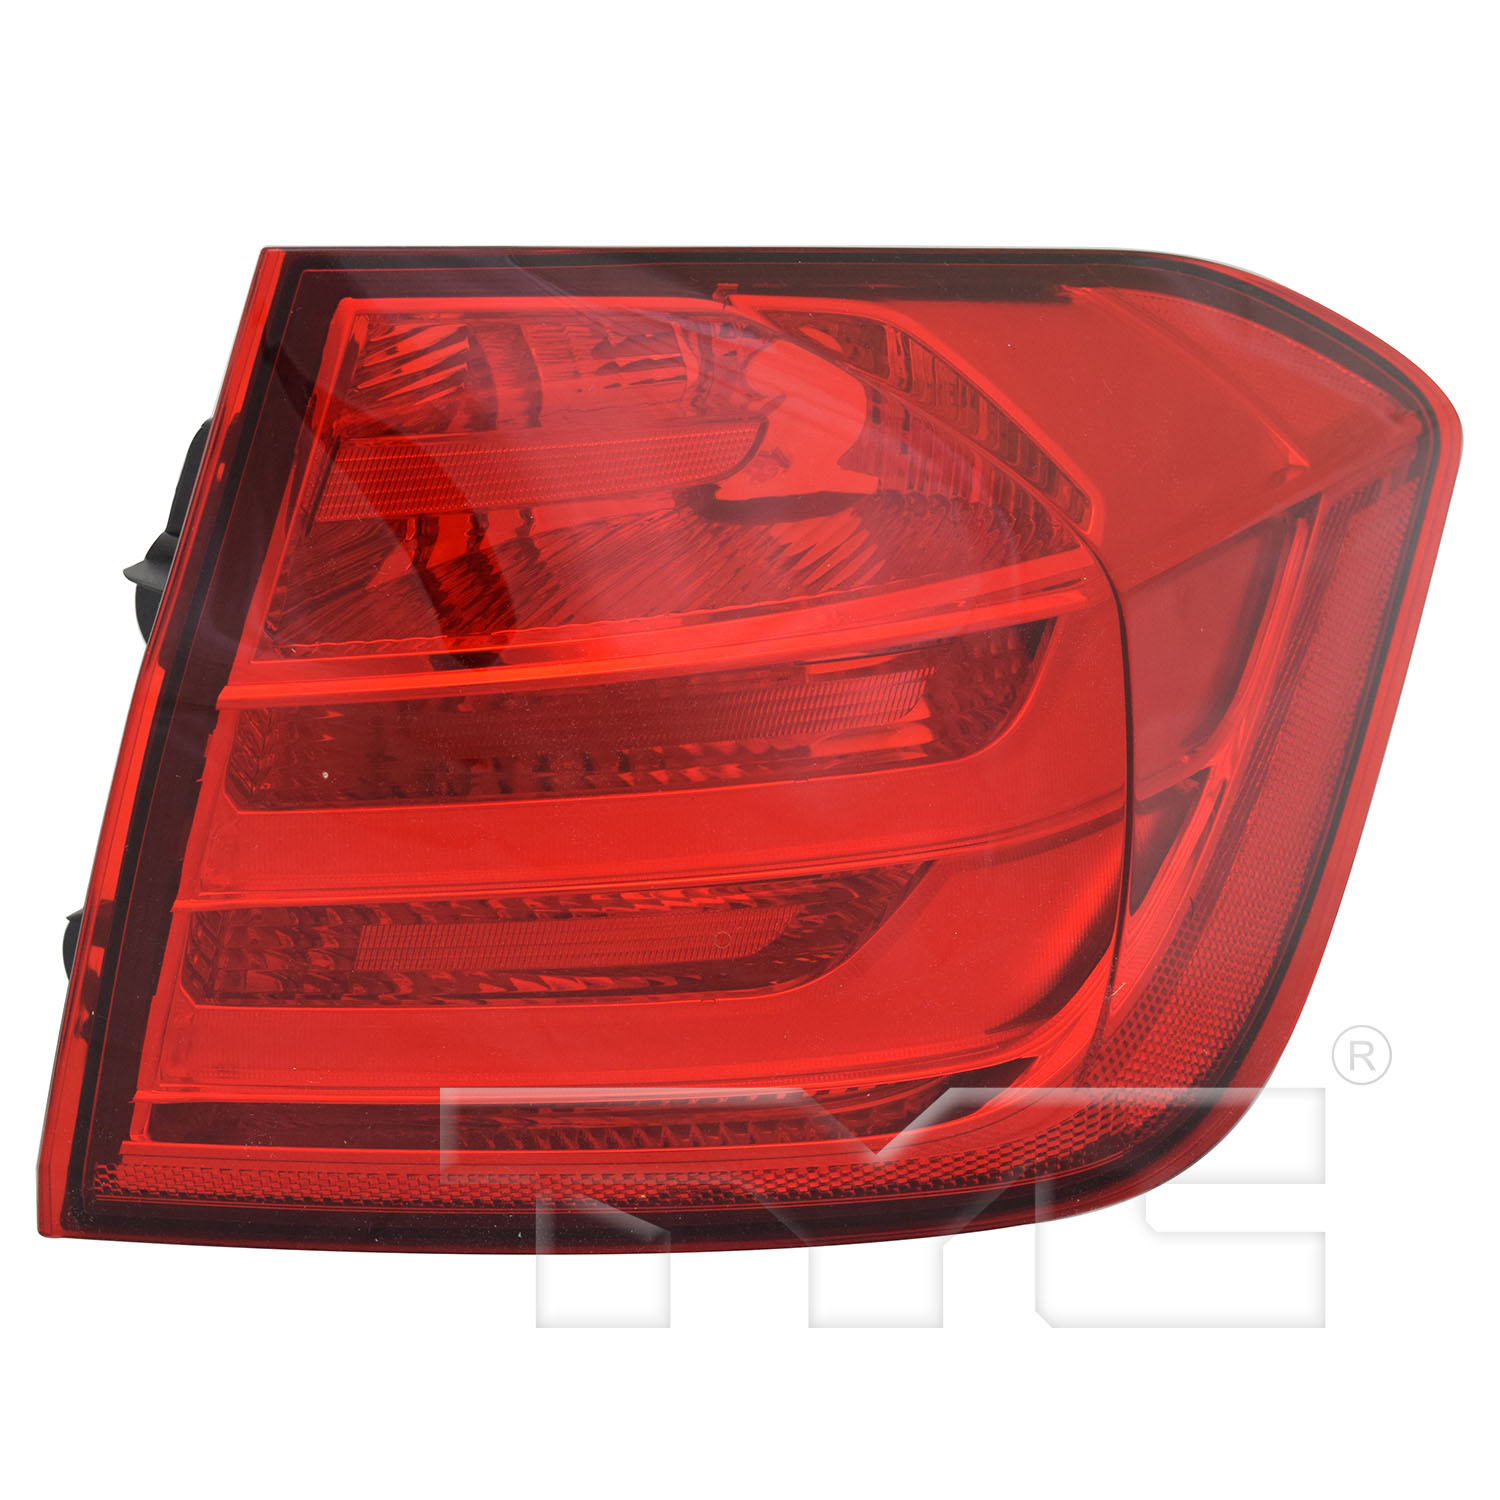 Aftermarket TAILLIGHTS for BMW - 335I, 335i,12-15,RT Taillamp assy outer